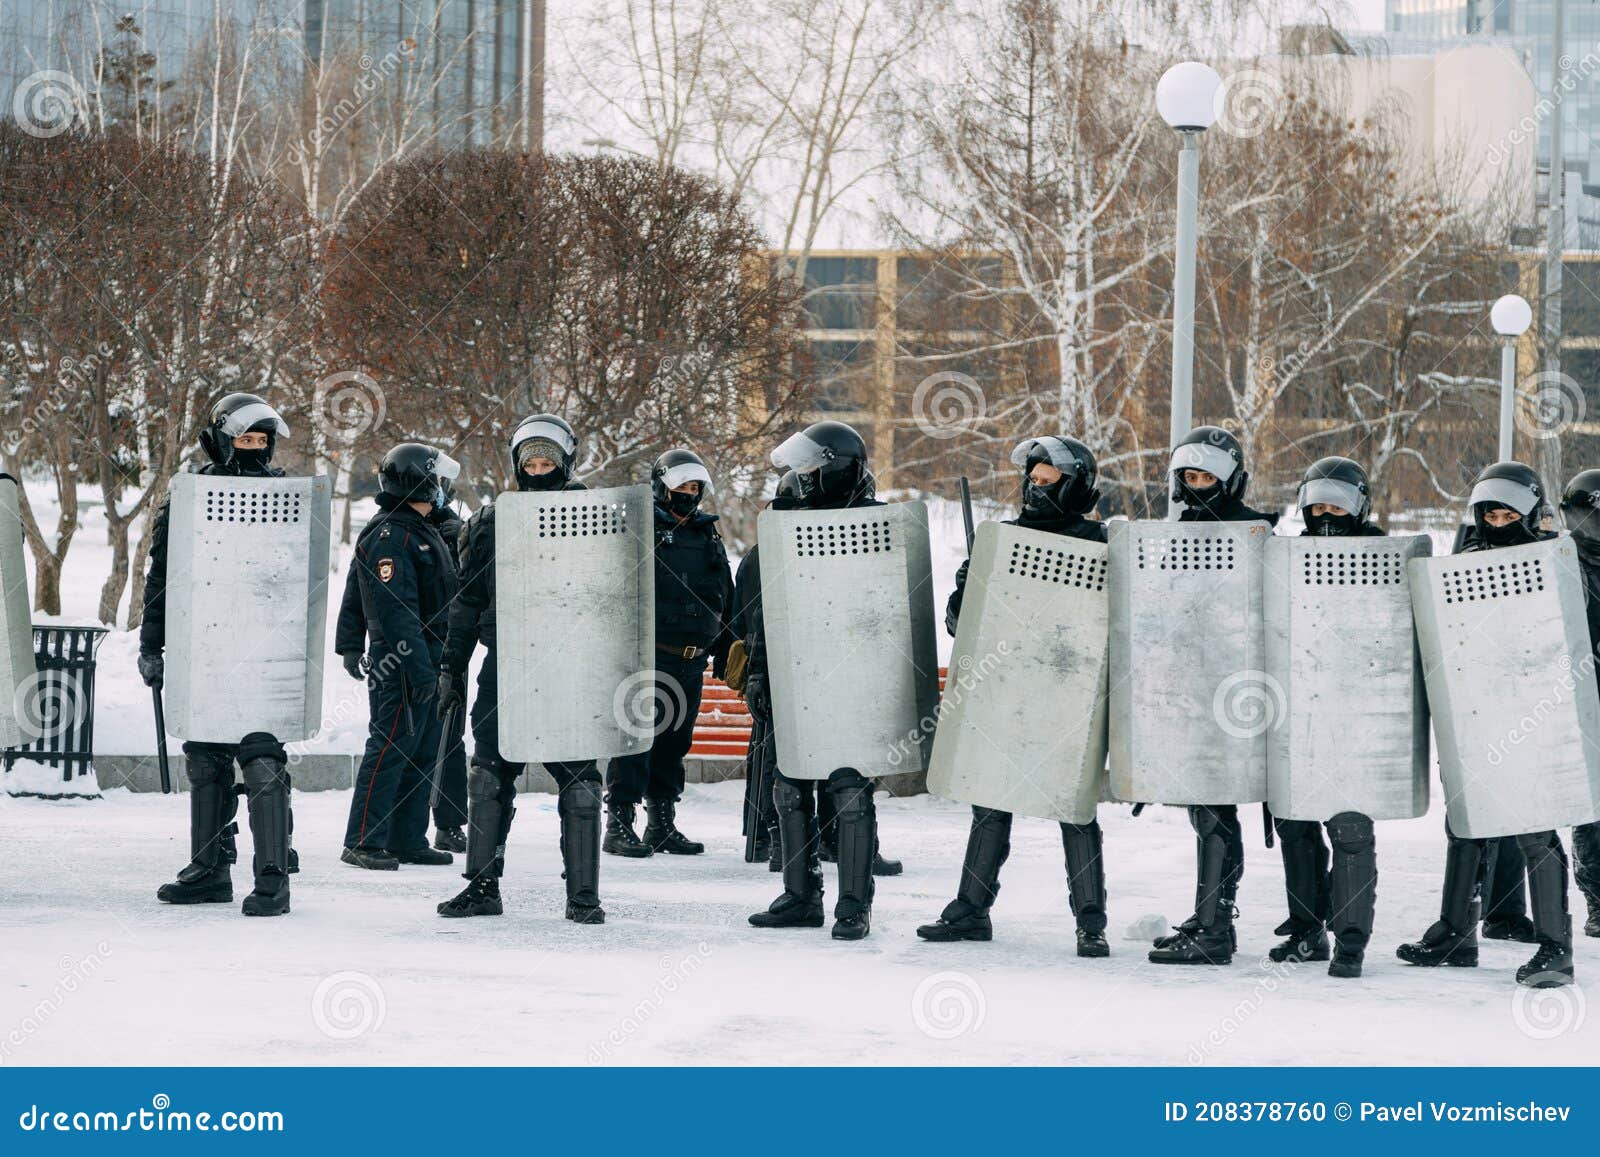 Yekaterinburg, Russia - January 23, 2021: Riot Police Run To Disperse ...